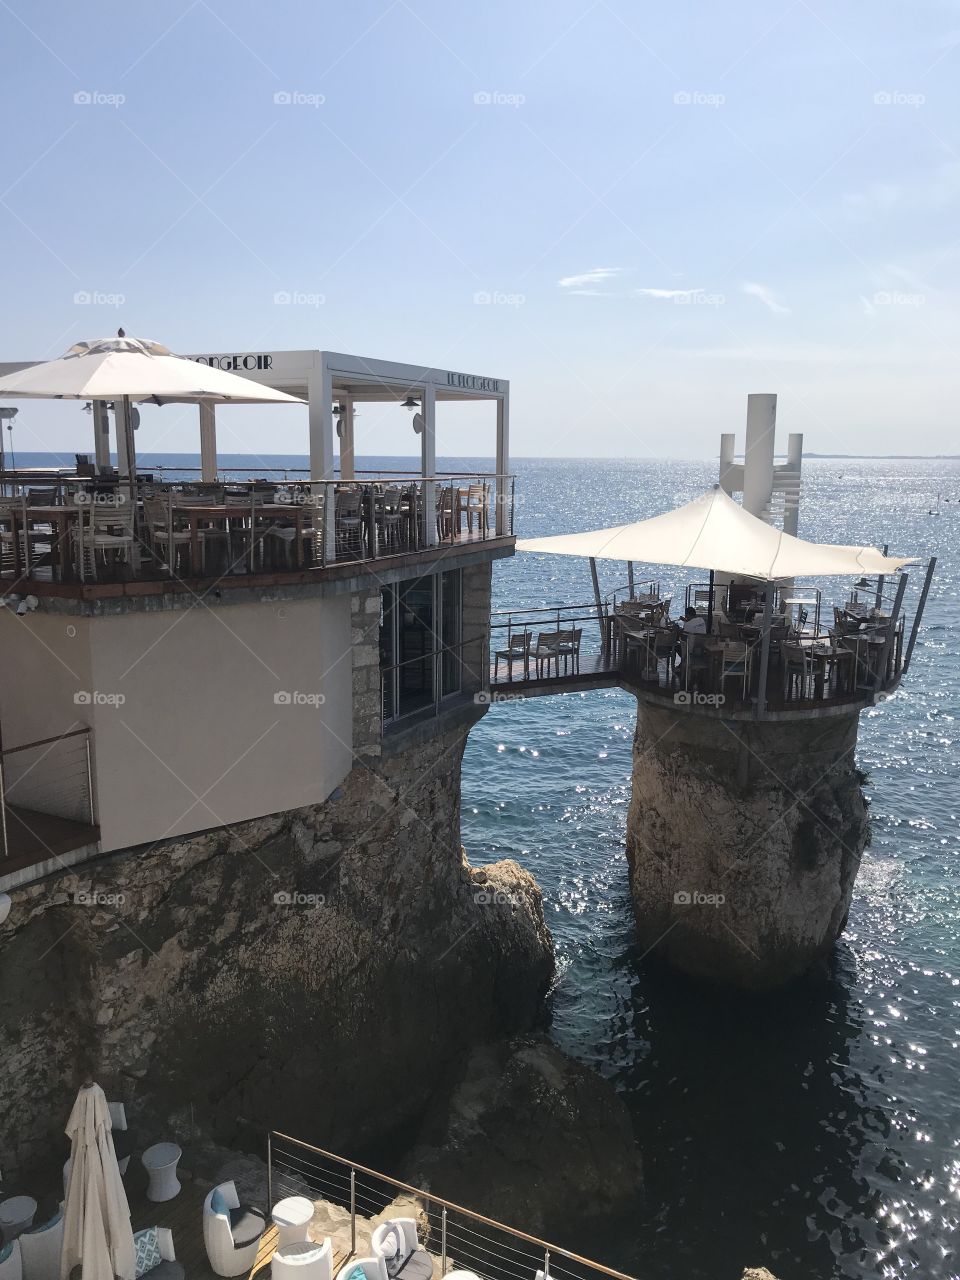 Luxury restaurant by the meadle of the azur sea